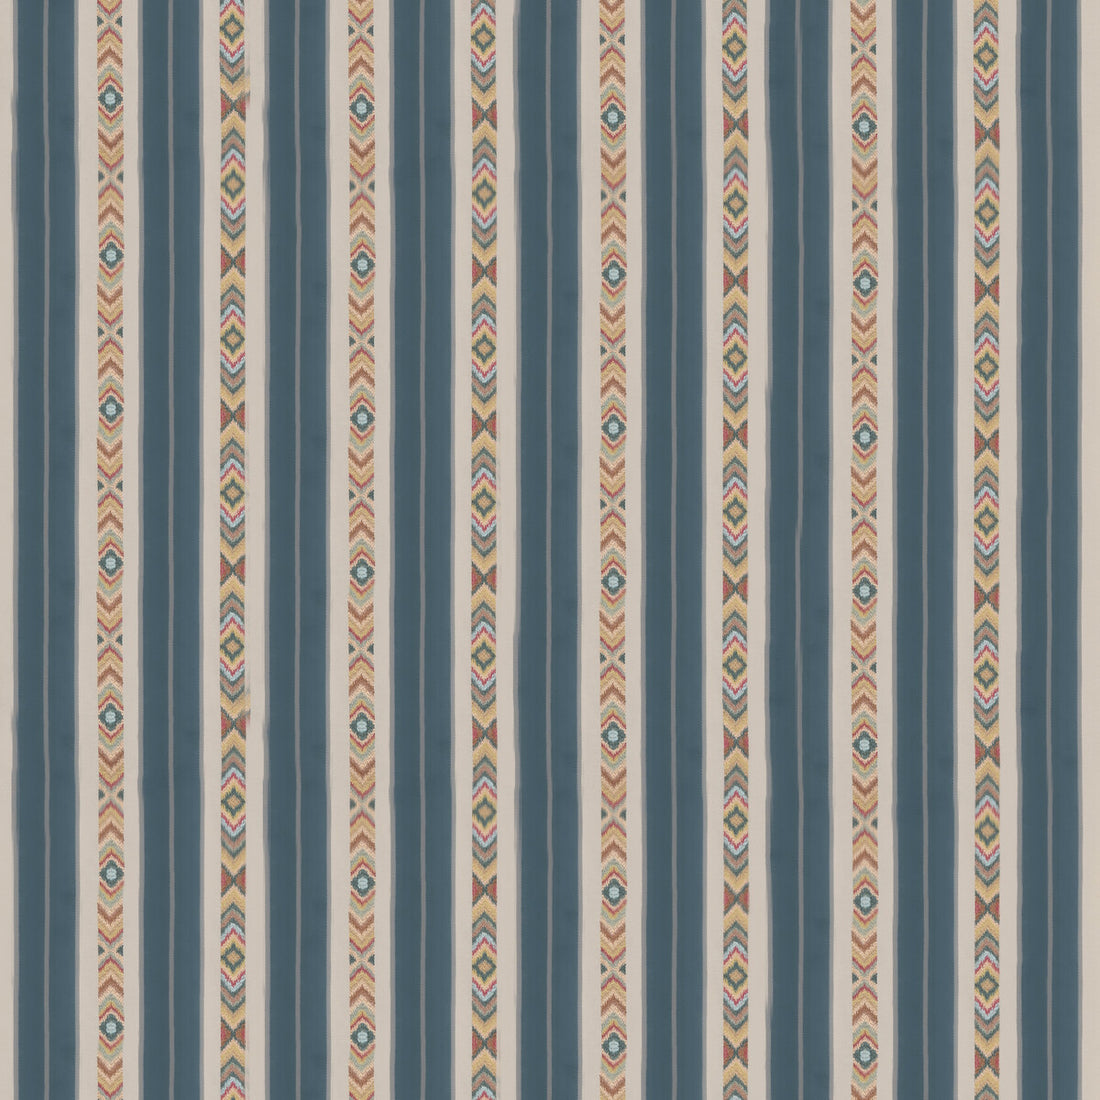 Ashlar Stripe fabric in blue color - pattern BF10943.1.0 - by G P &amp; J Baker in the Burford collection